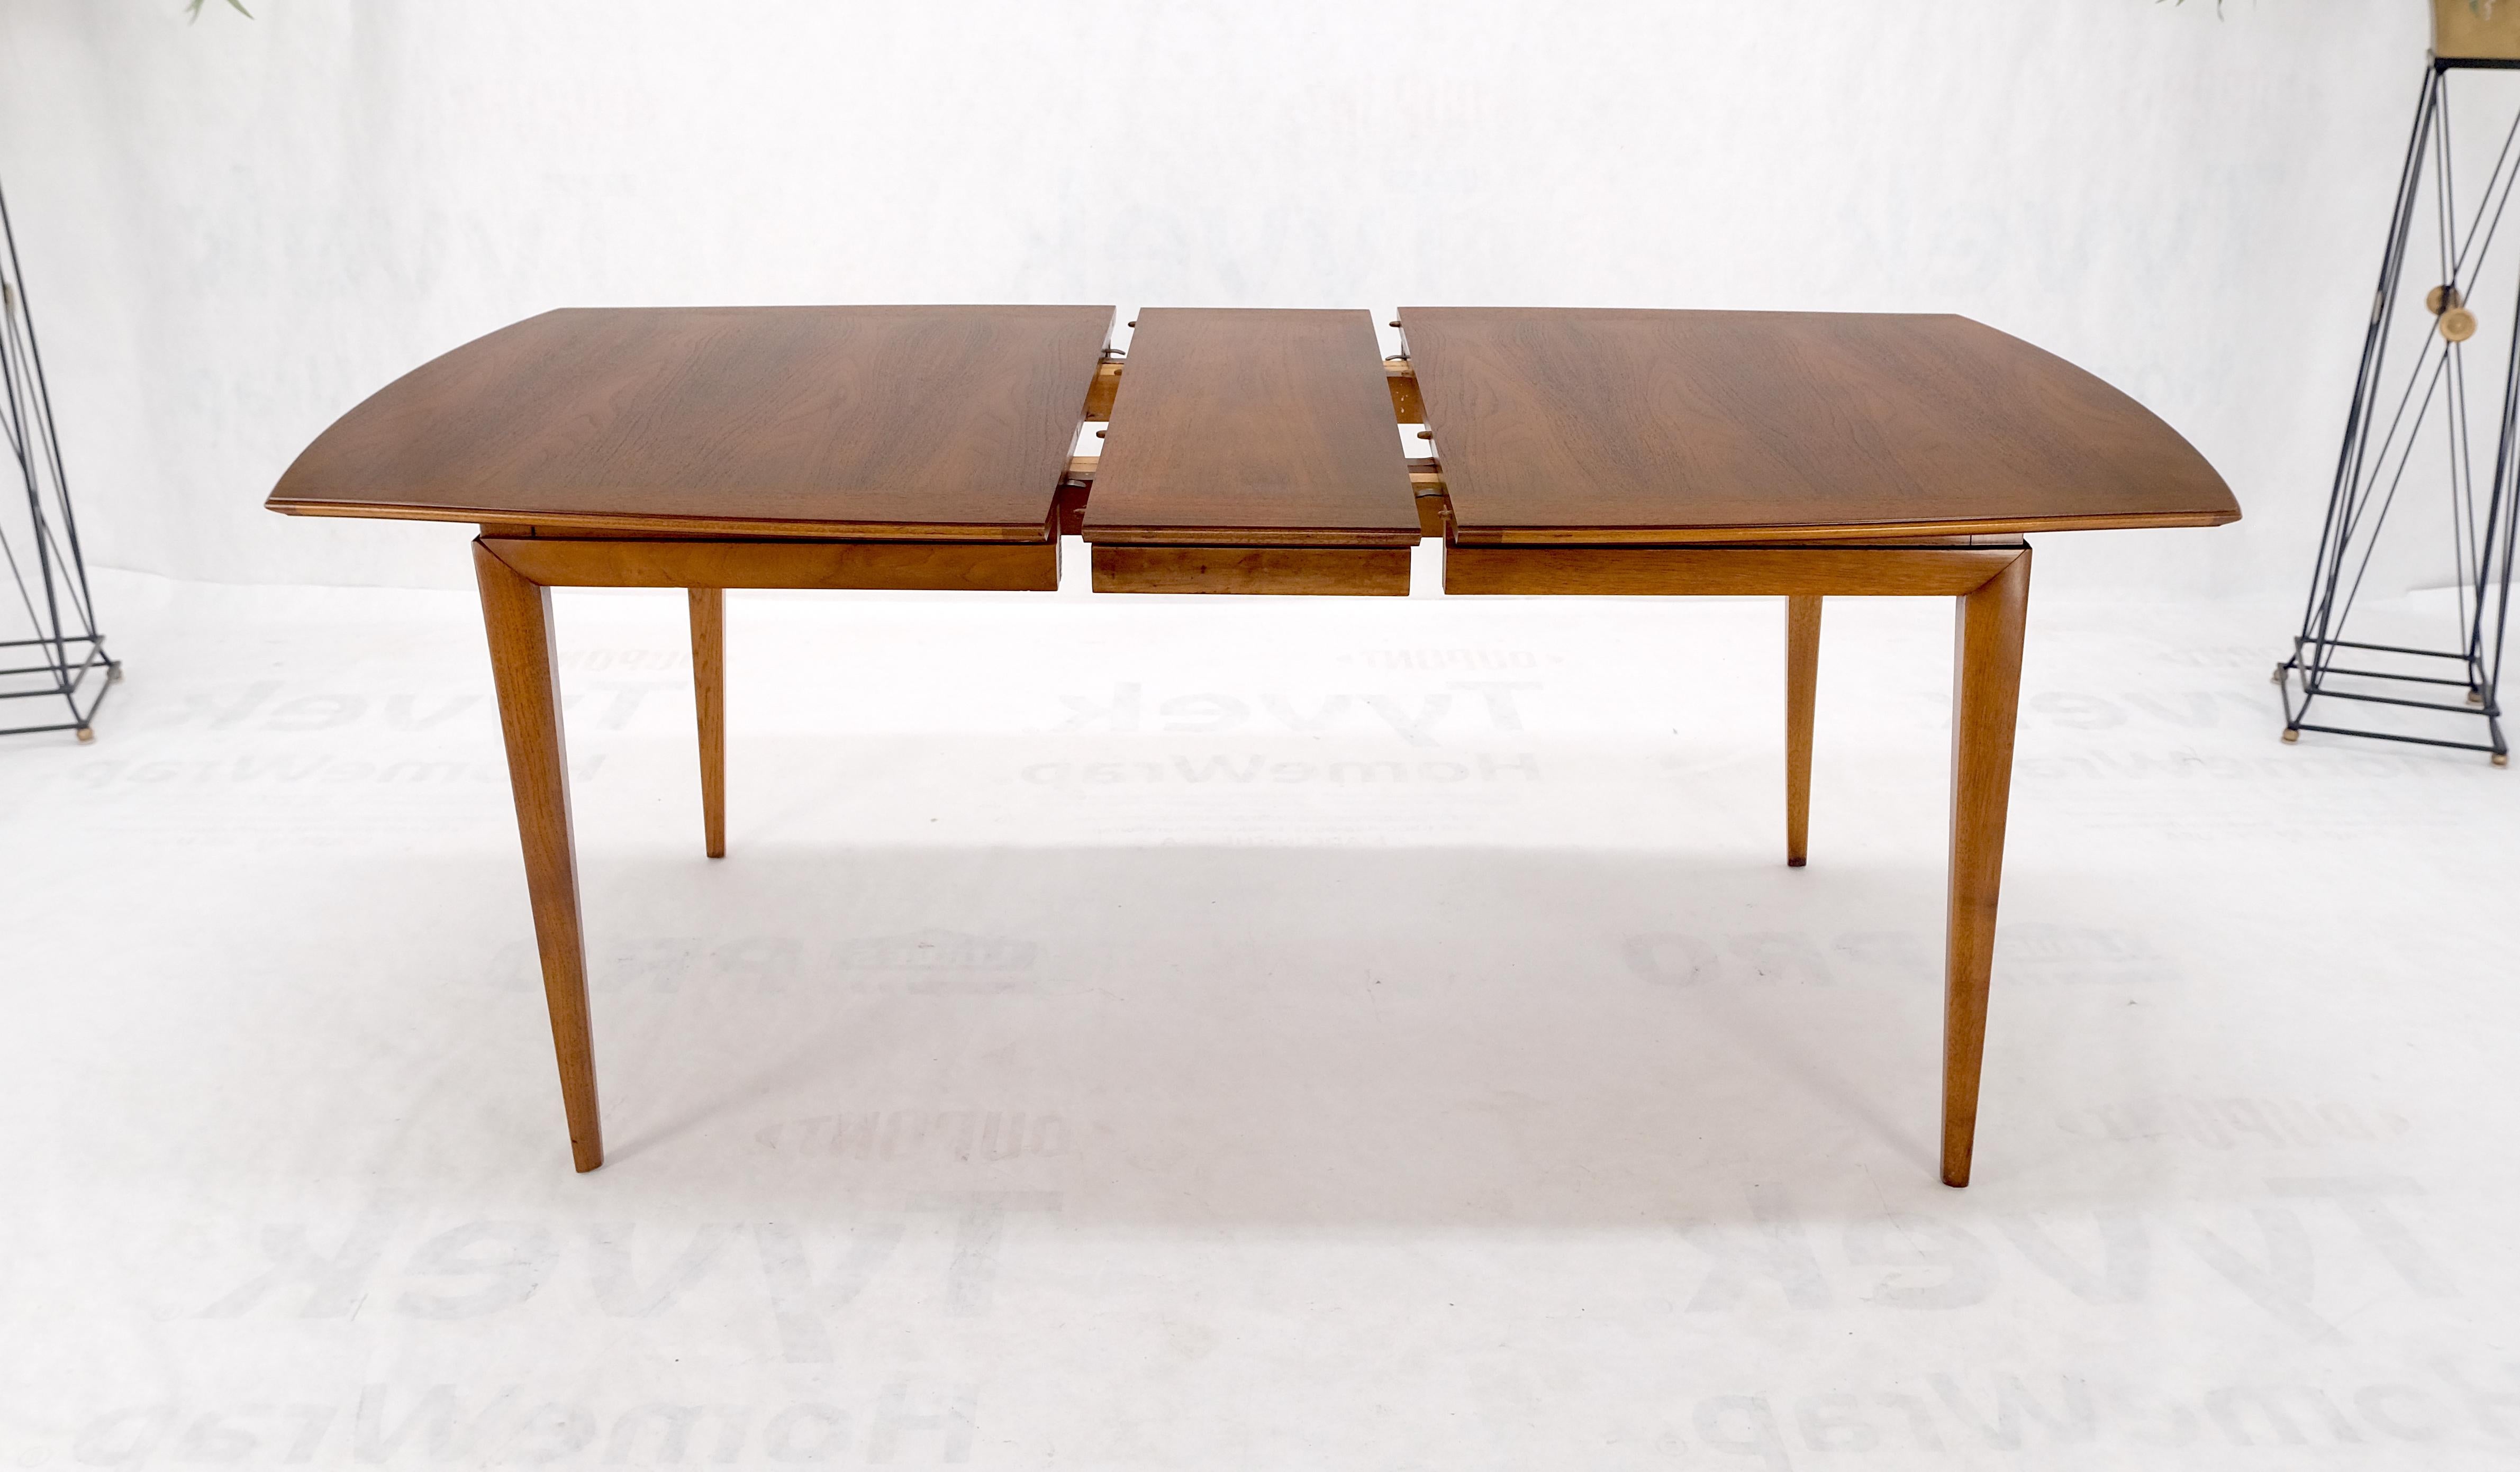 American Walnut Mid Century Modern Boat Shape Dining Table 1 Extension Leaf MINT In Excellent Condition For Sale In Rockaway, NJ